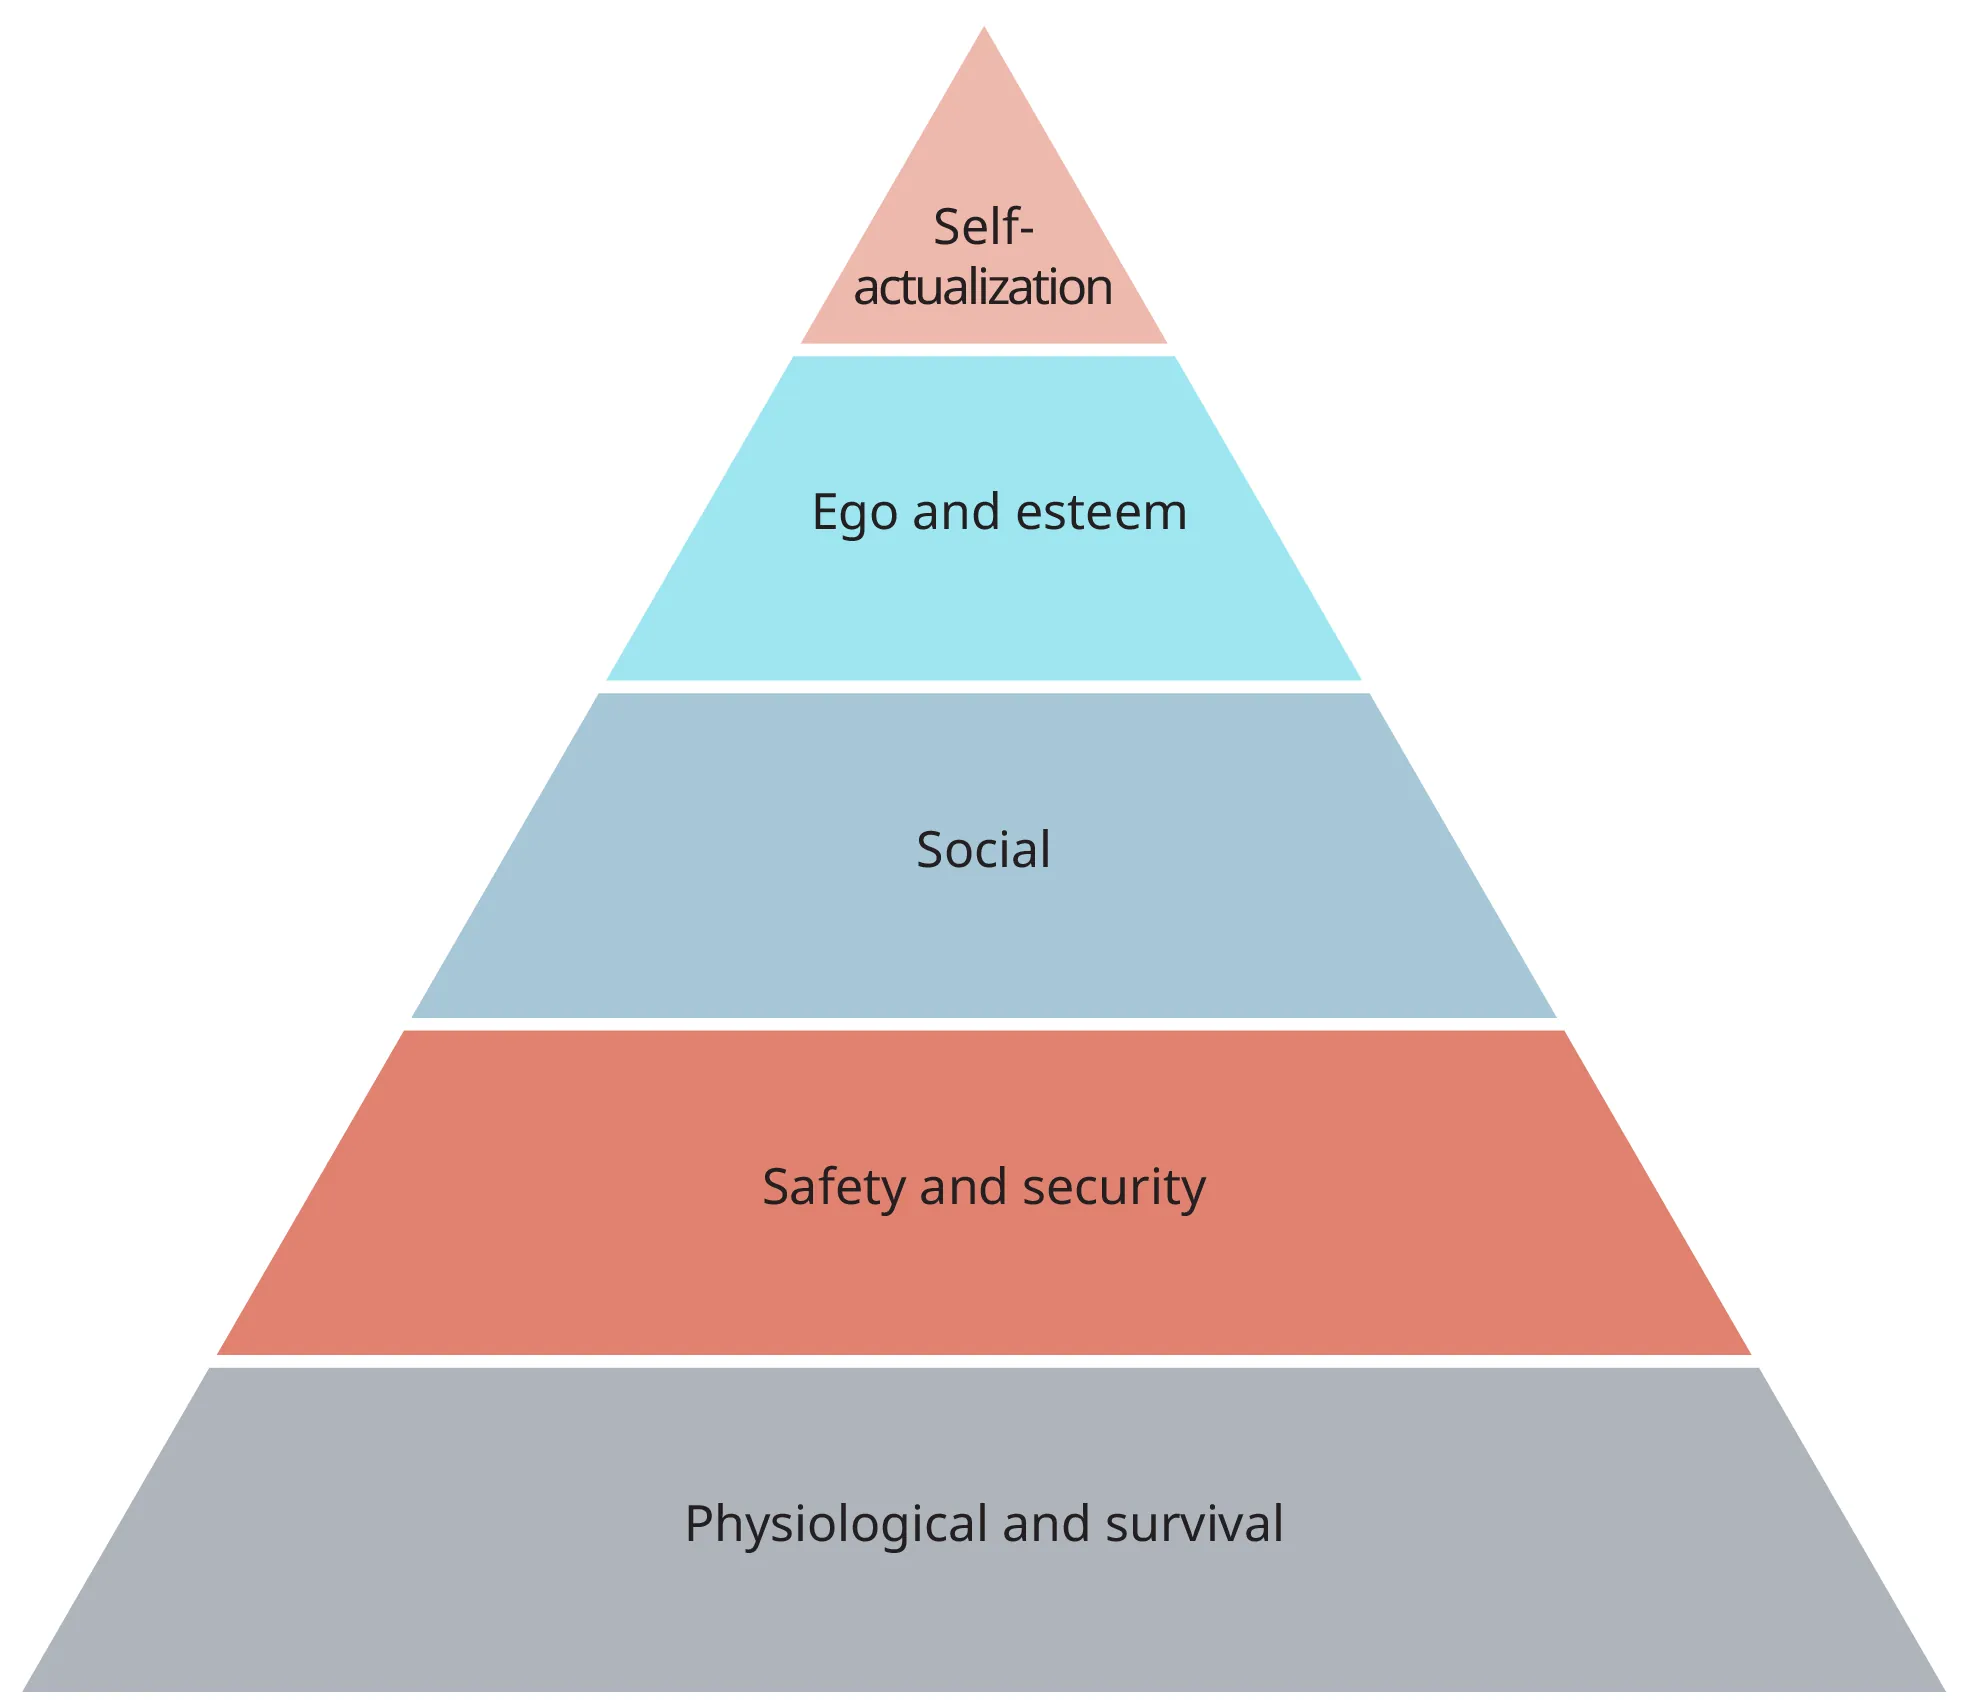 An illustration shows a pyramid representing Maslow's hierarchy of needs, with lower-order needs at the bottom.